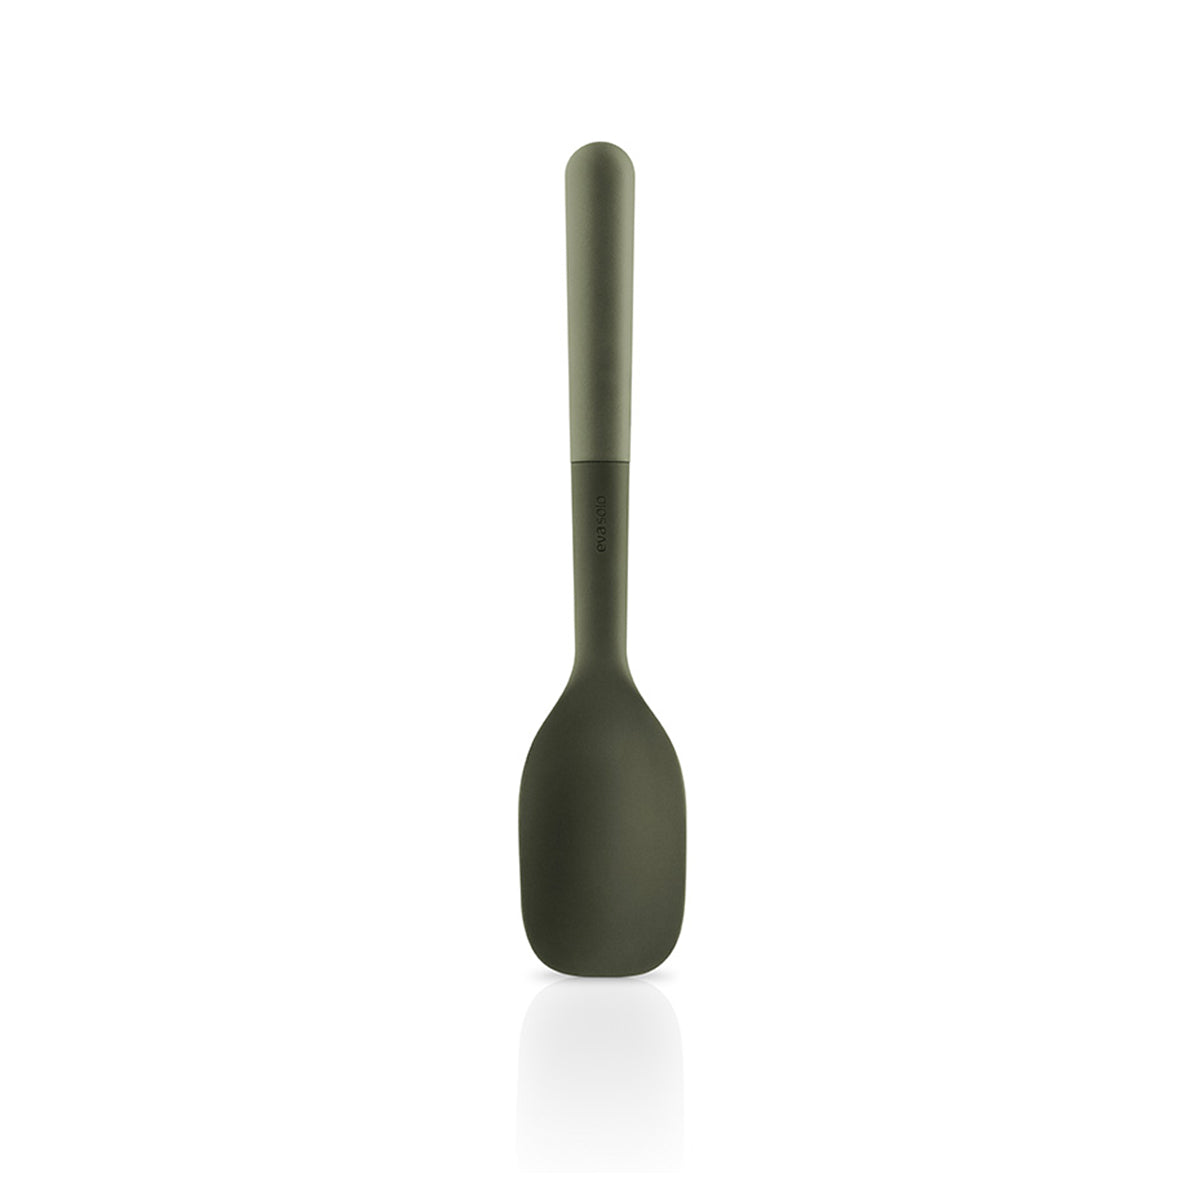 Green Tool Serving Spoon Large